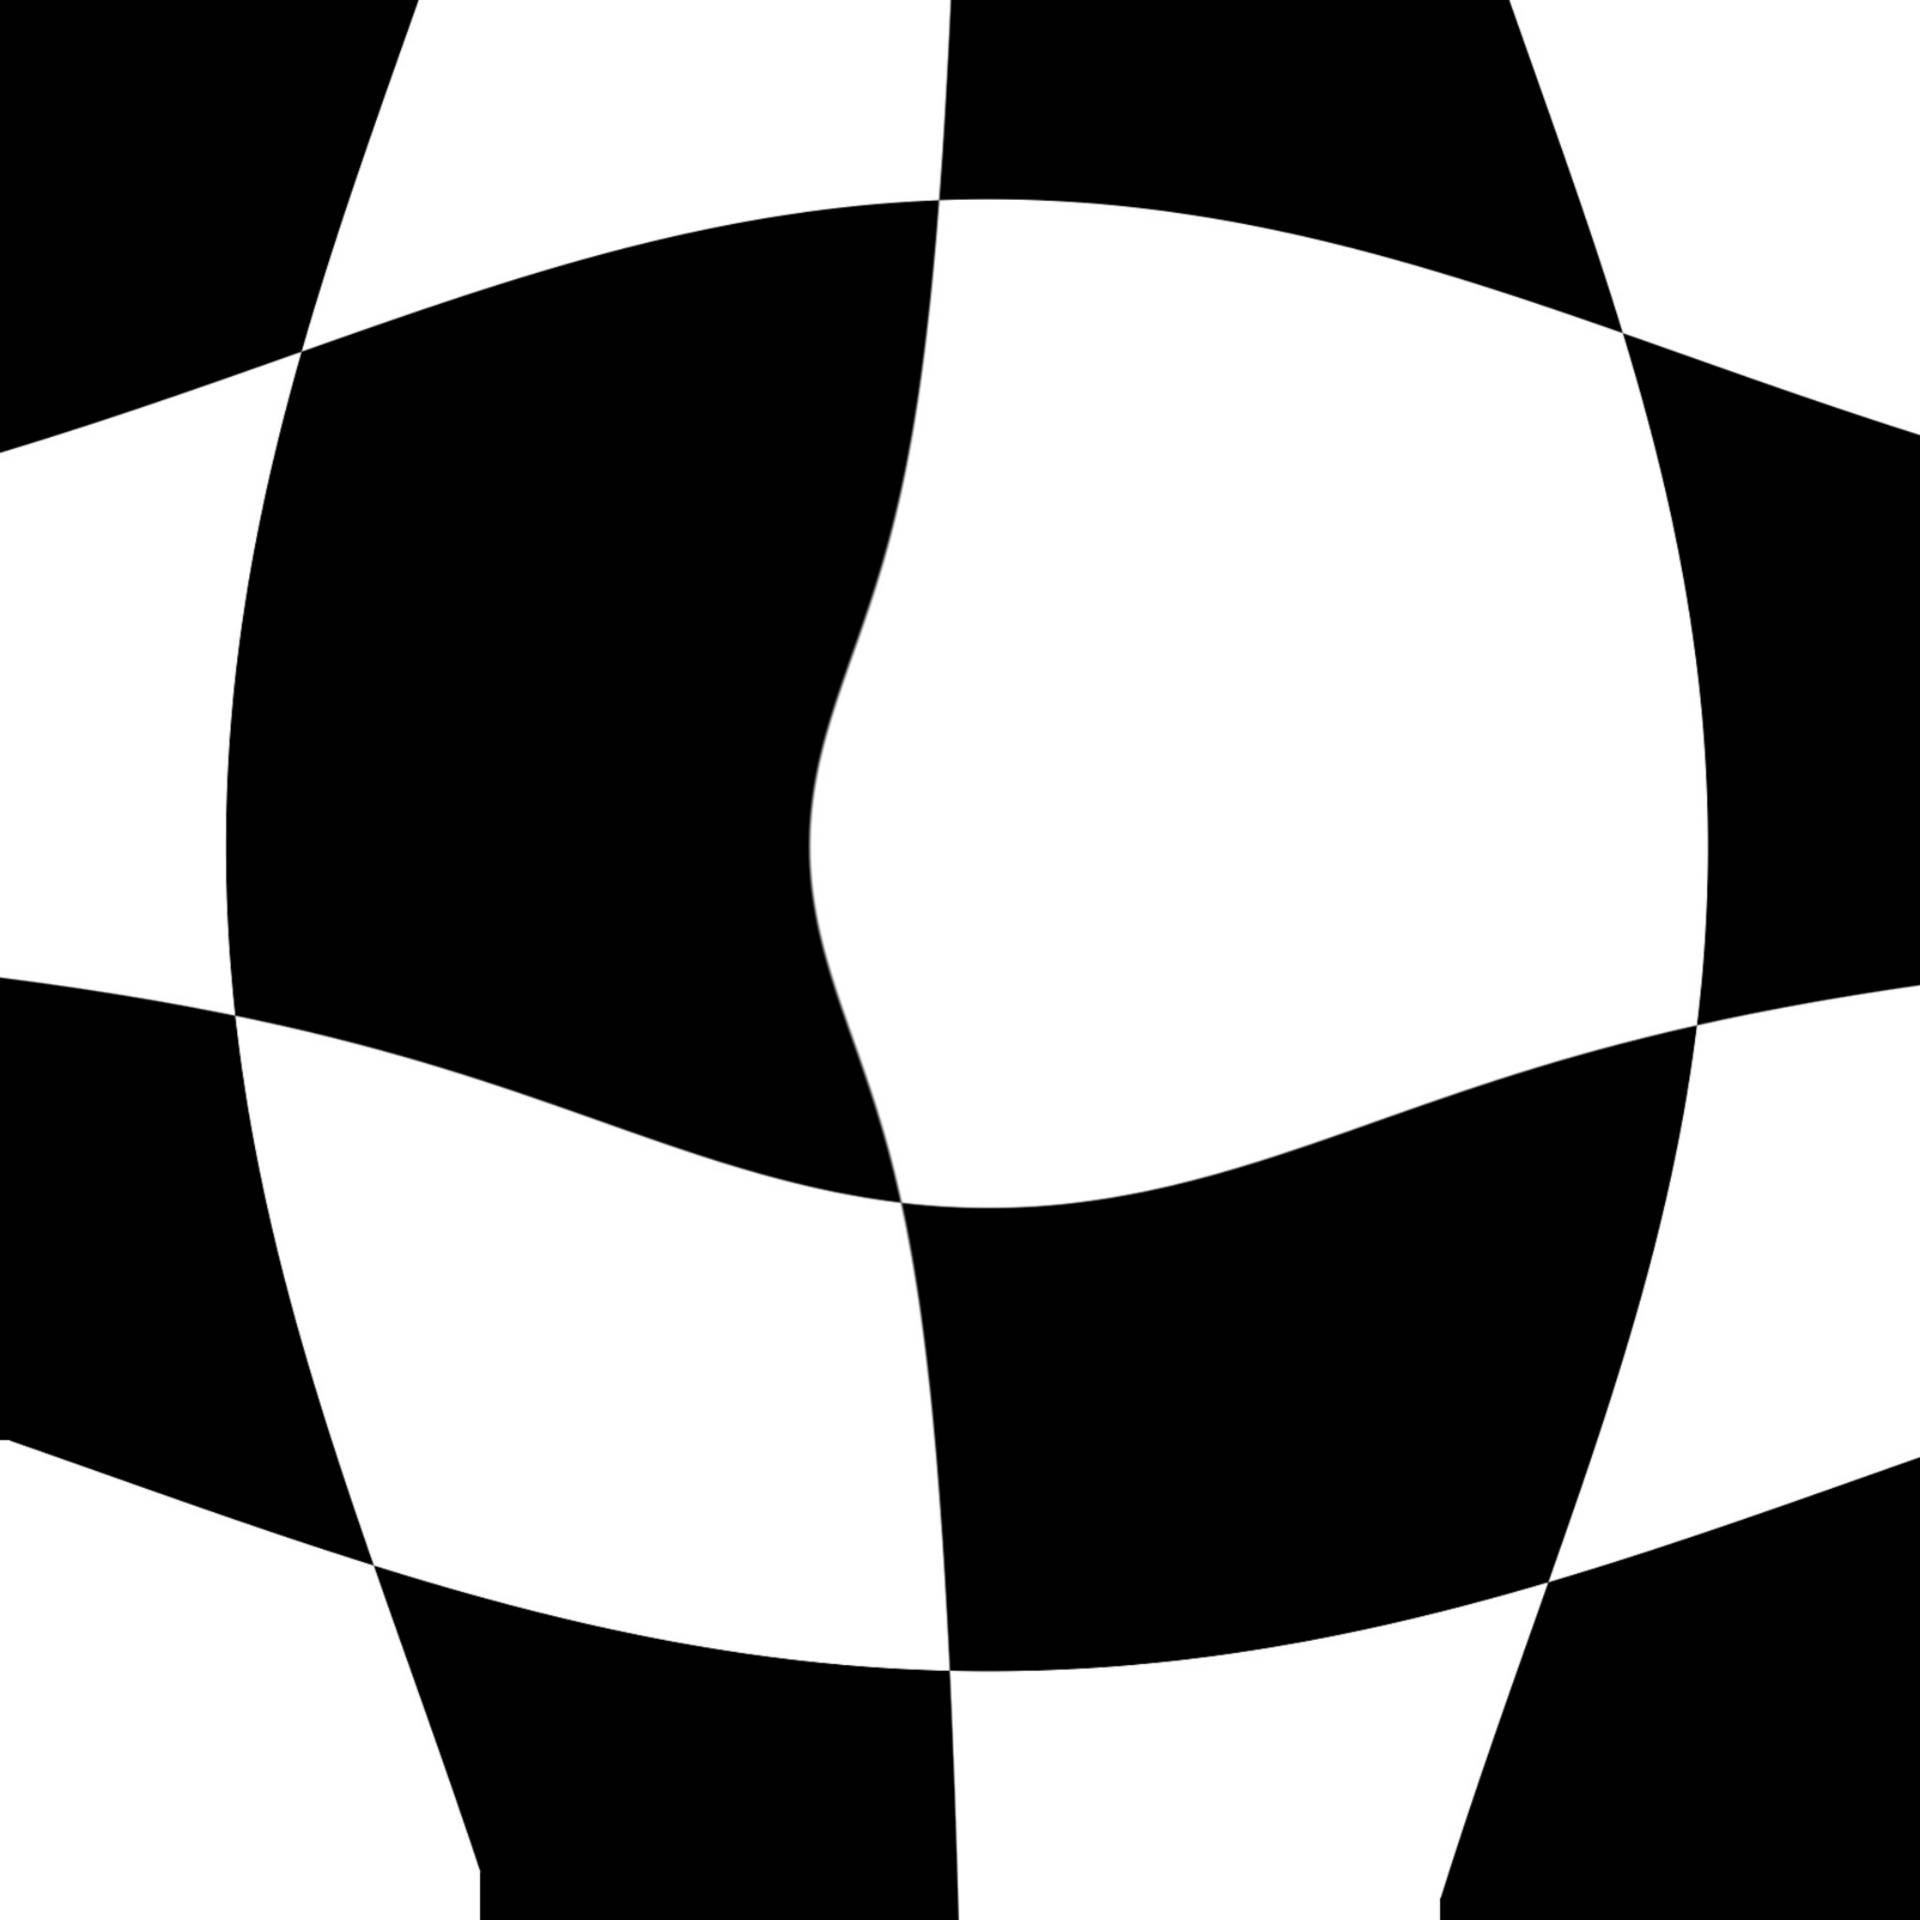 Distorted Black And White Squares Checkered Pattern Wallpaper